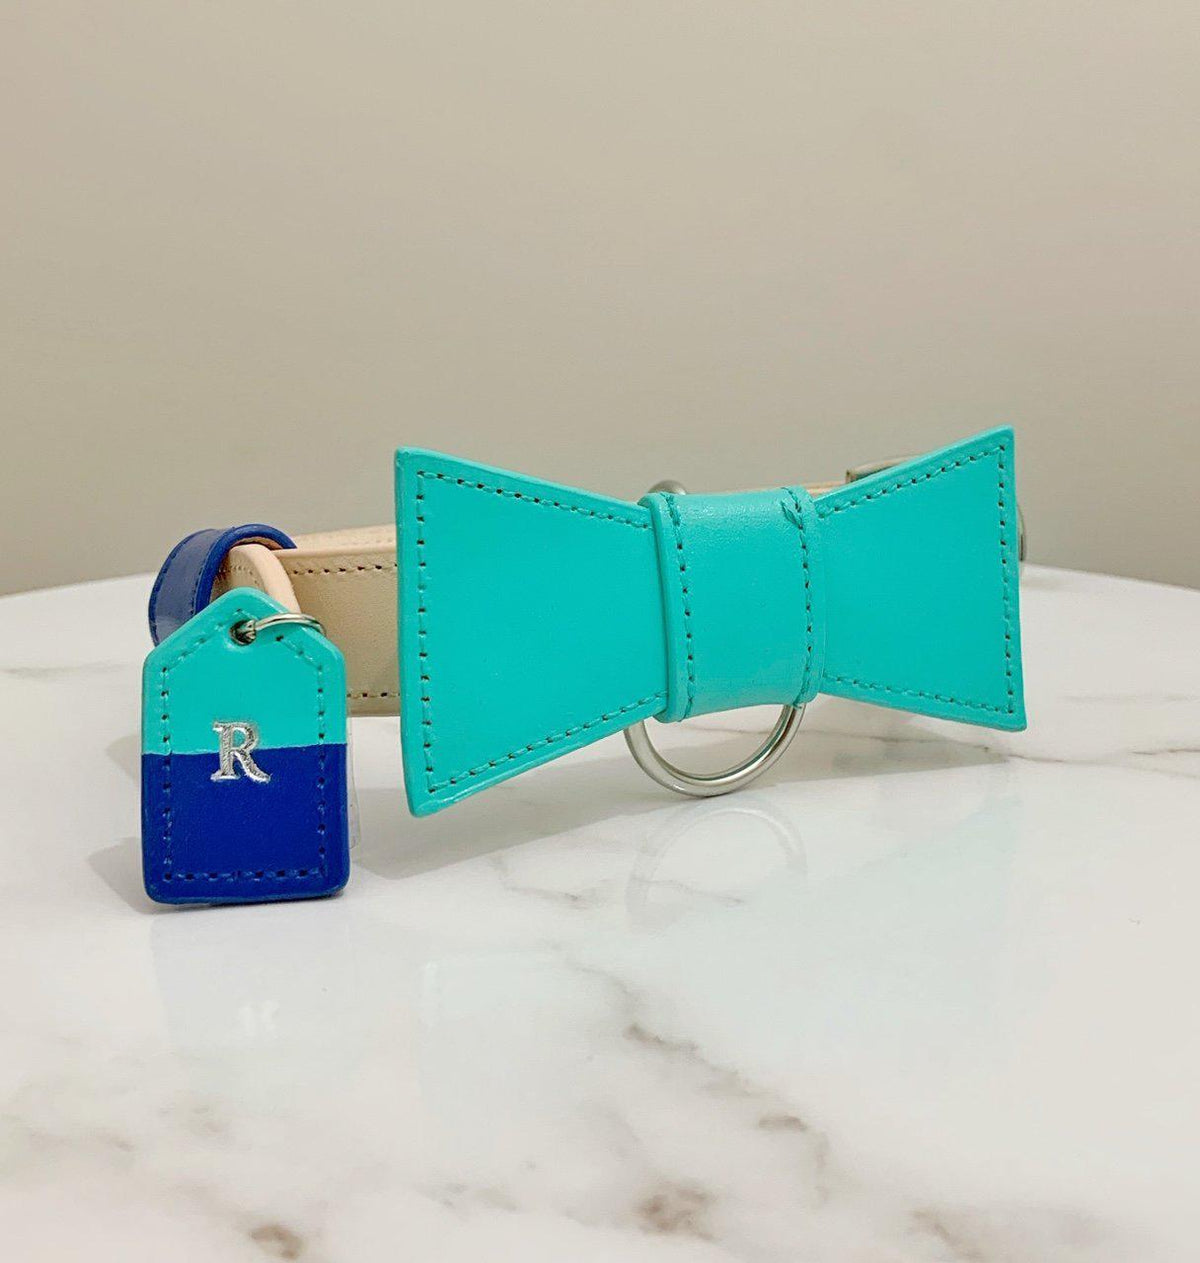 Turquoise and Blue Custom Leather Dog Collar with Bow Tie and Monogram - Bespoke Leather Dog Collar Made in Australia with Dog Tag